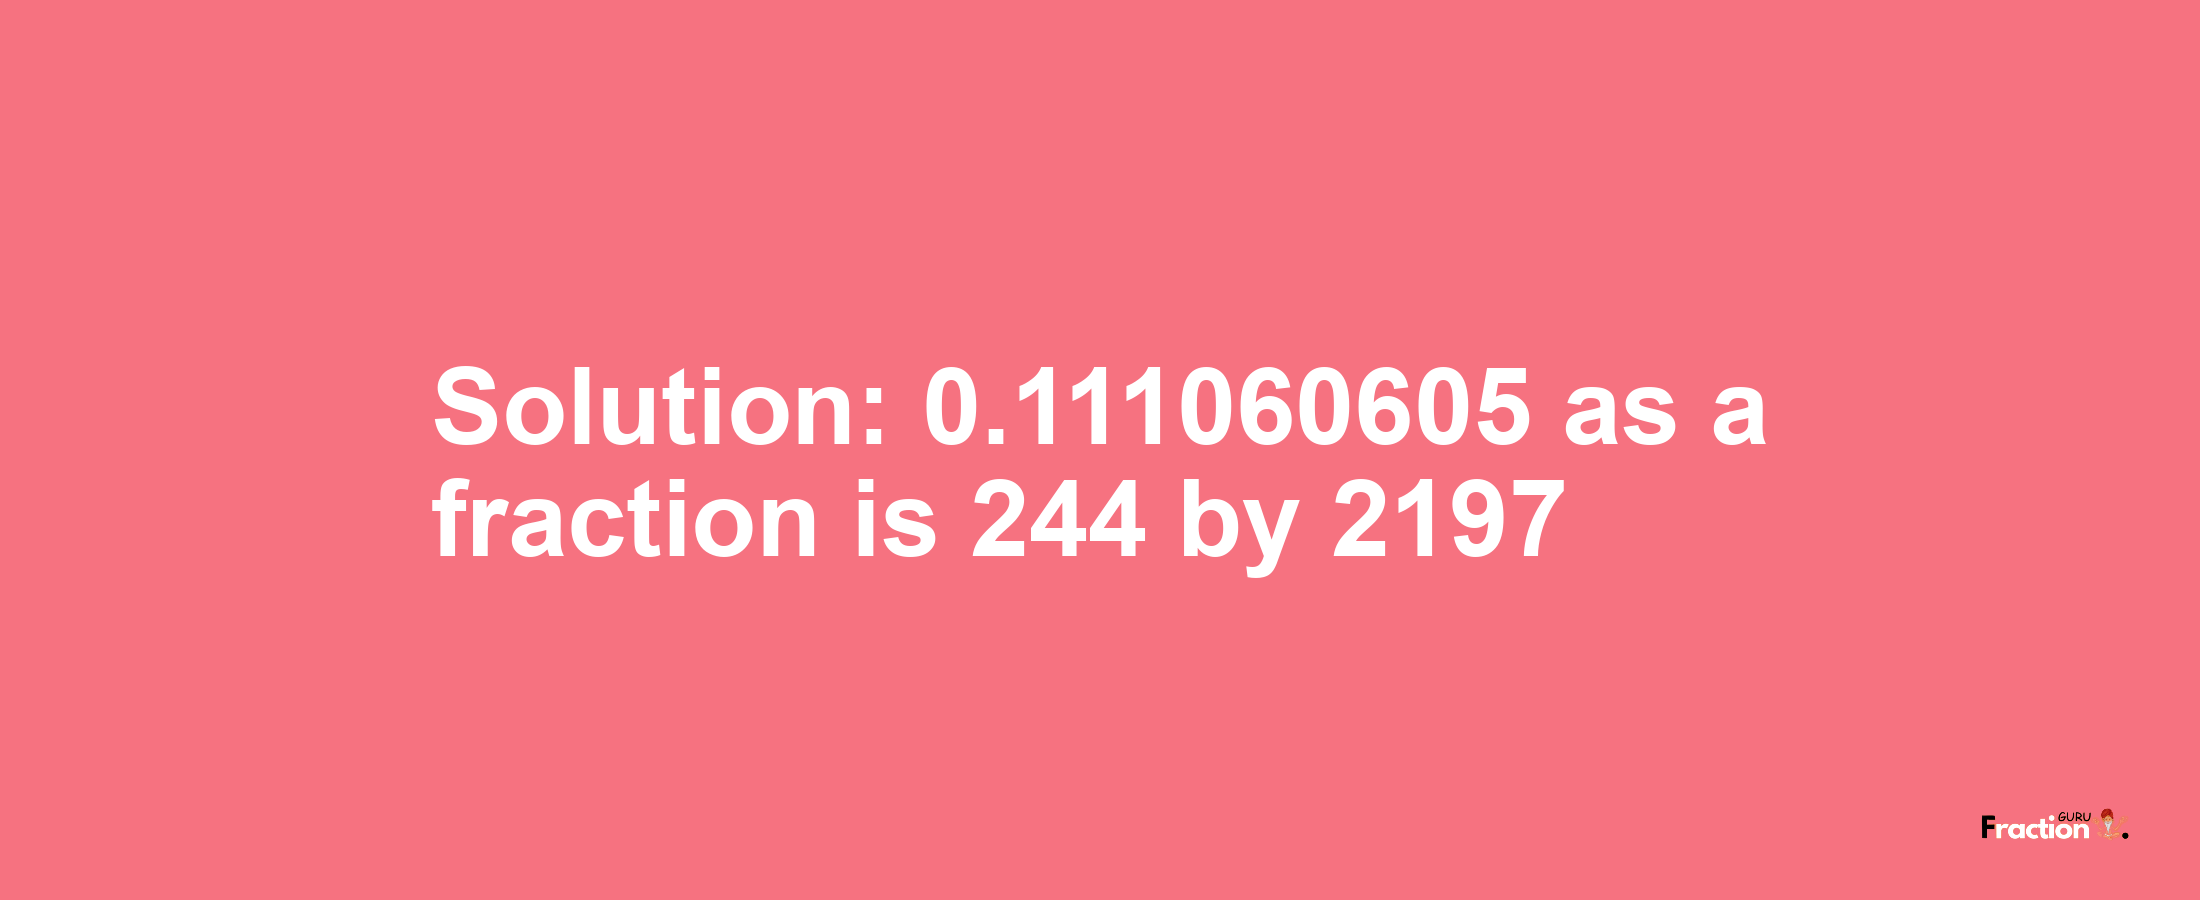 Solution:0.111060605 as a fraction is 244/2197